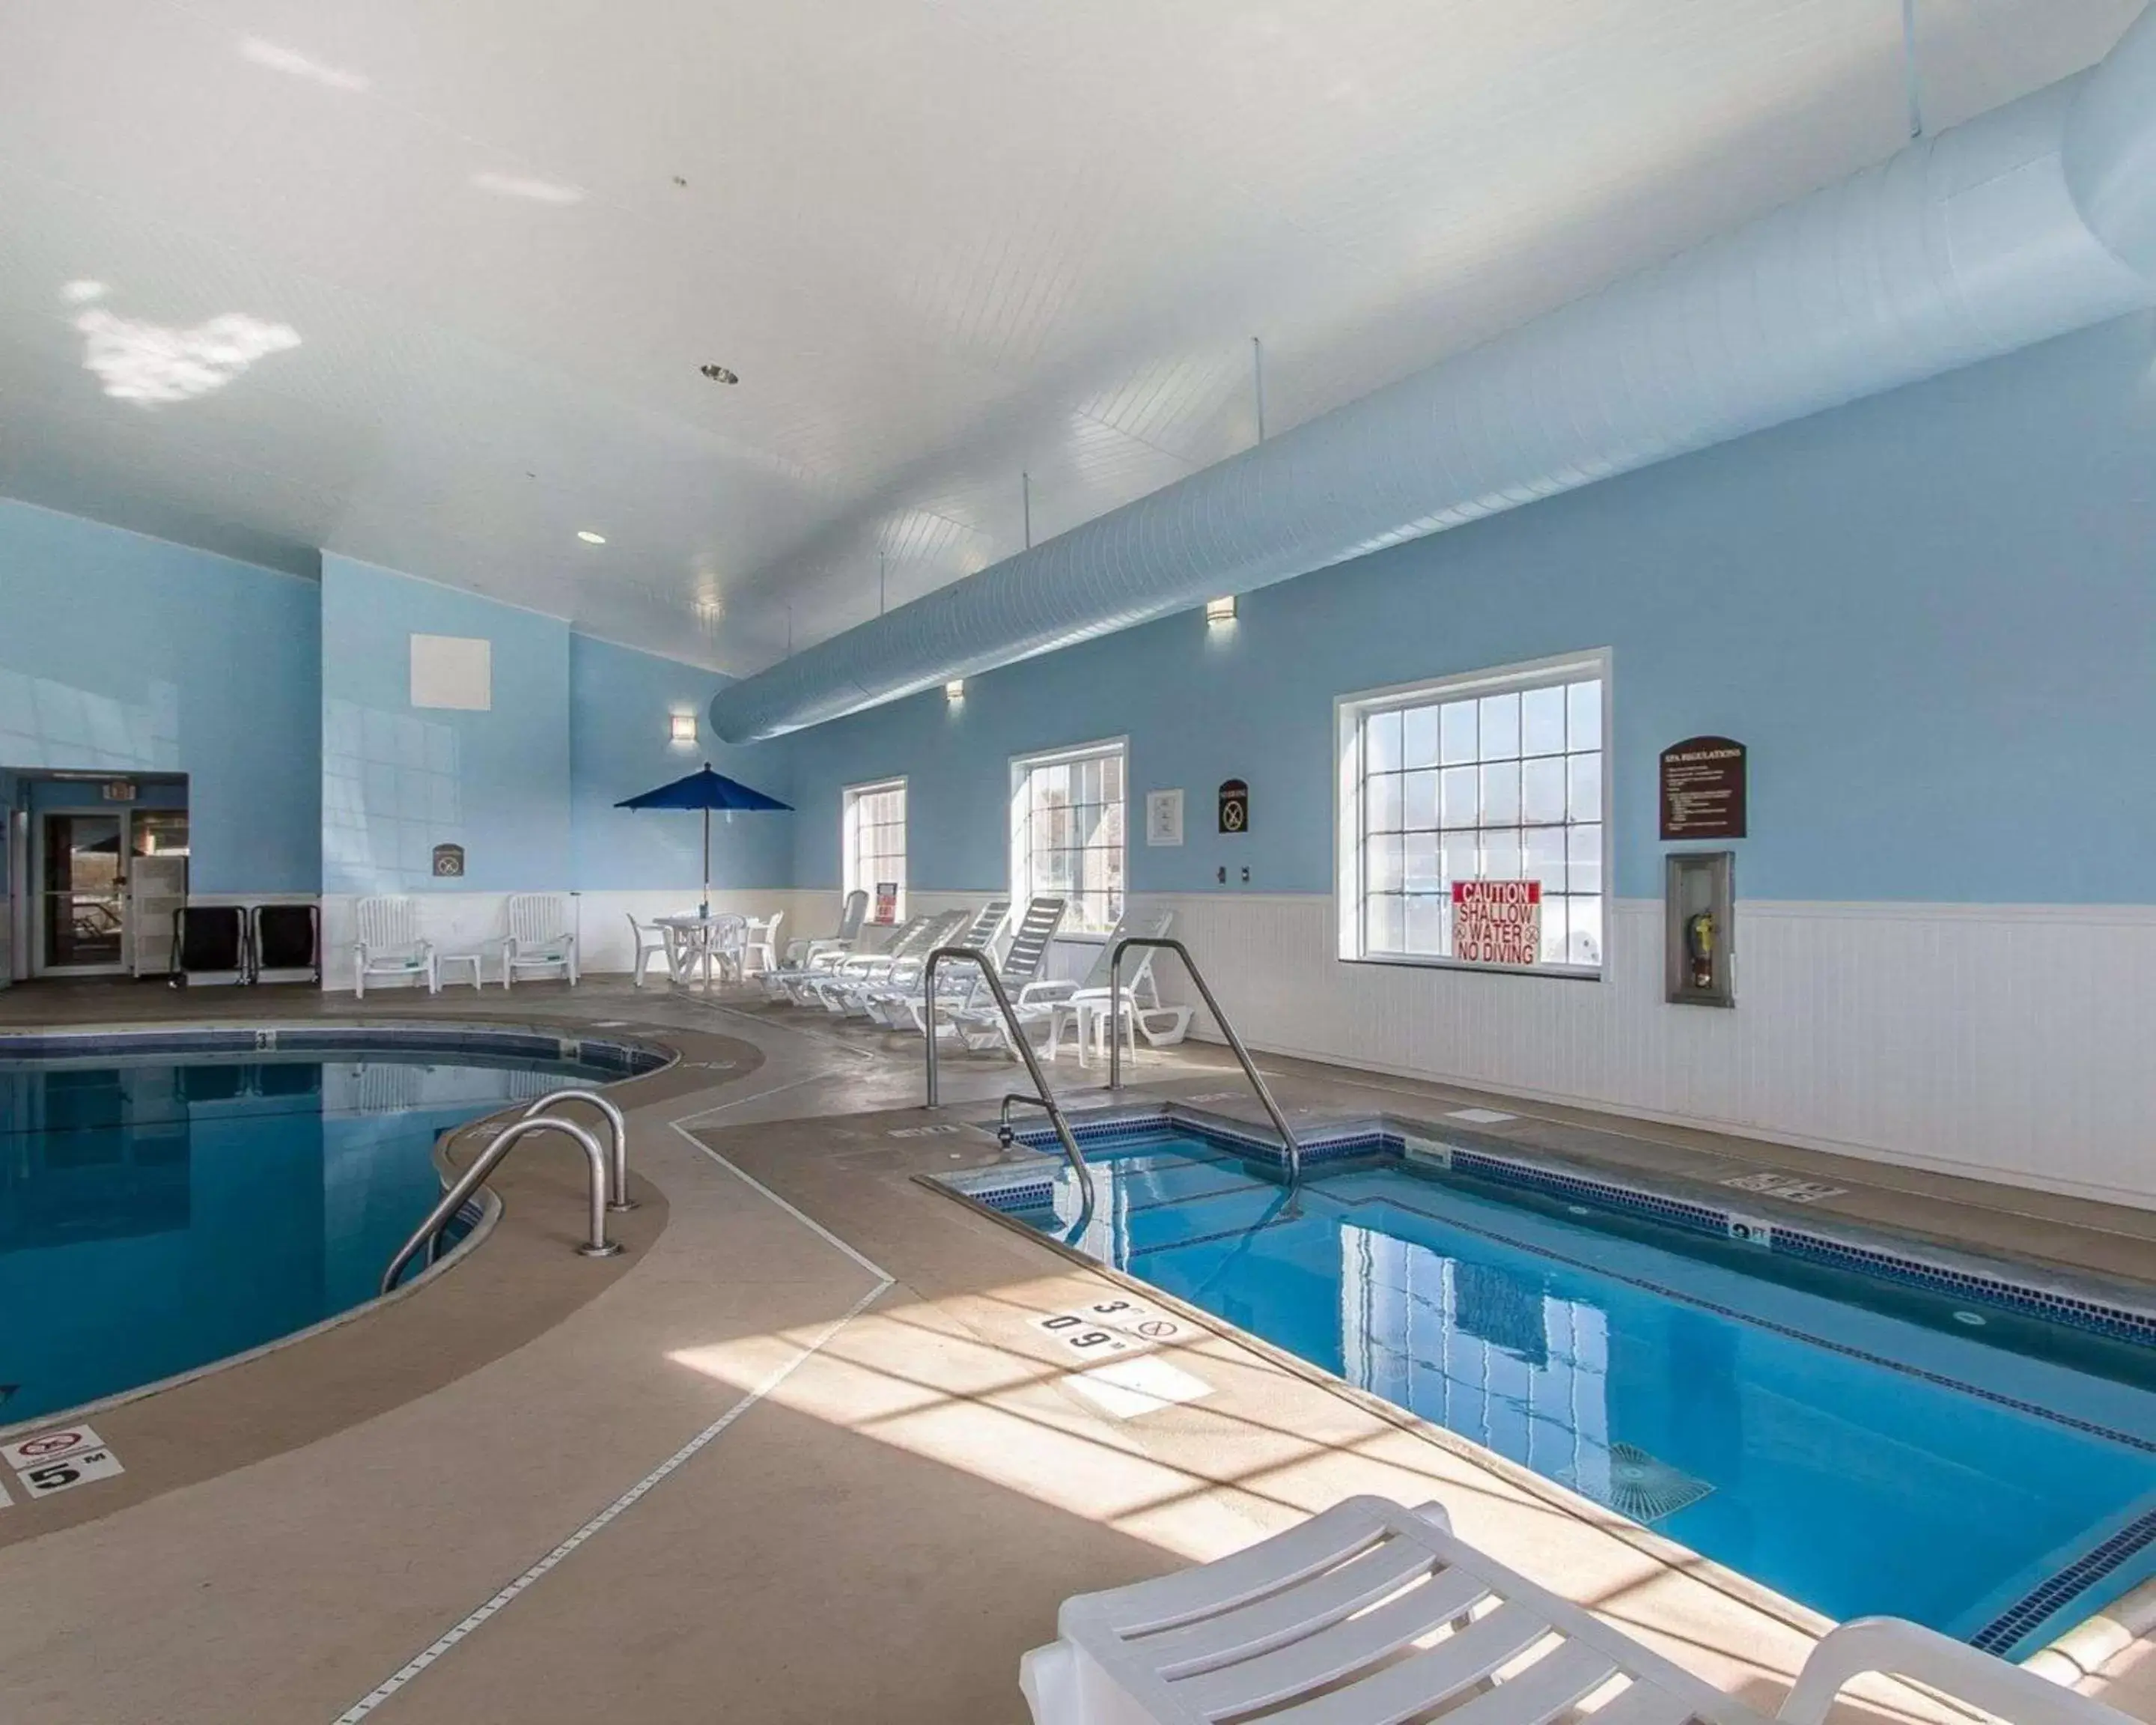 On site, Swimming Pool in Quality Inn & Suites Fort Madison near Hwy 61